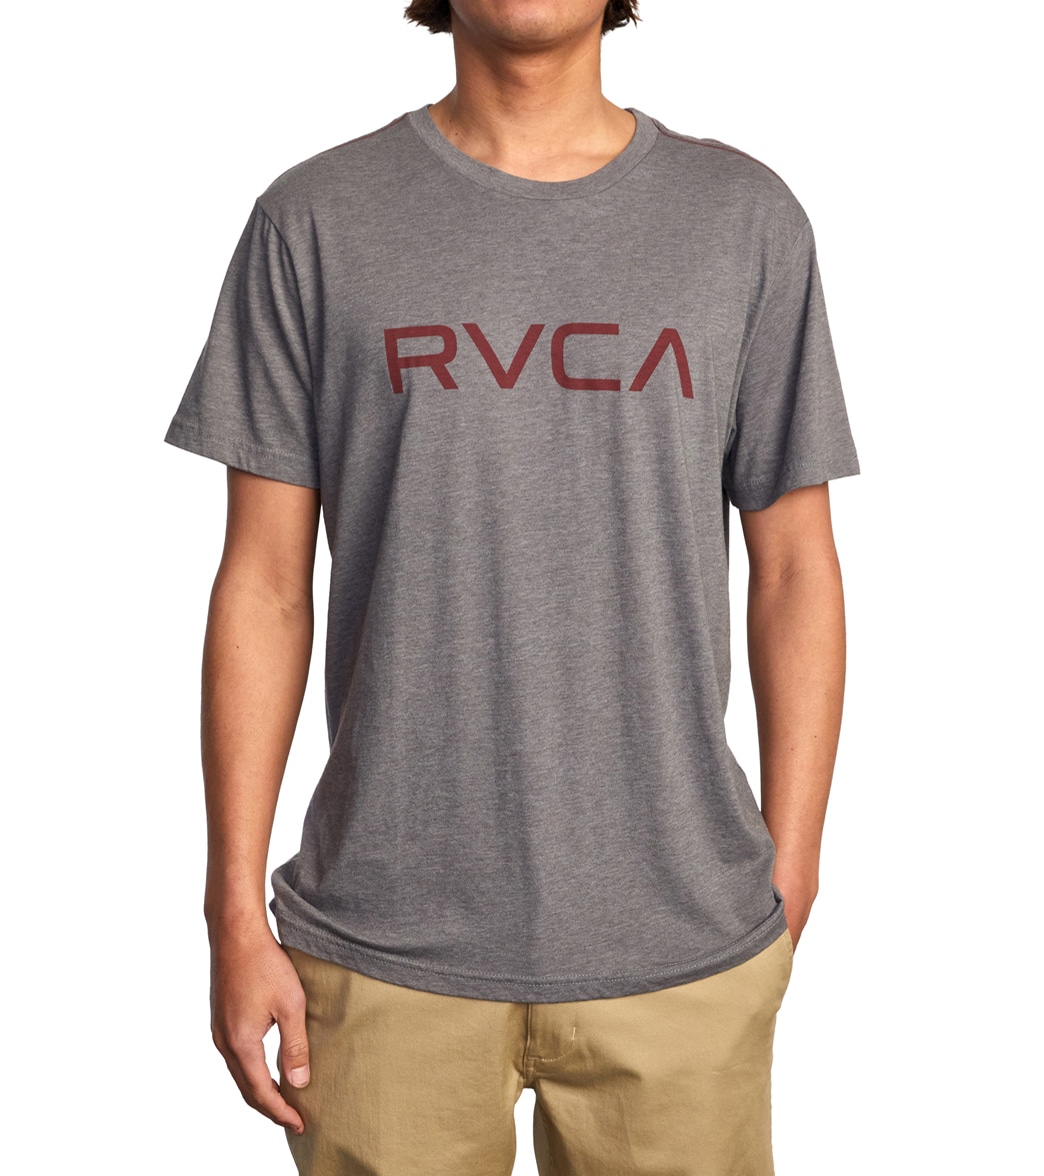 Men's Big Rvca Short Sleeve Tee Shirt - Smoked Red Large Cotton/Polyester - Swimoutlet.com